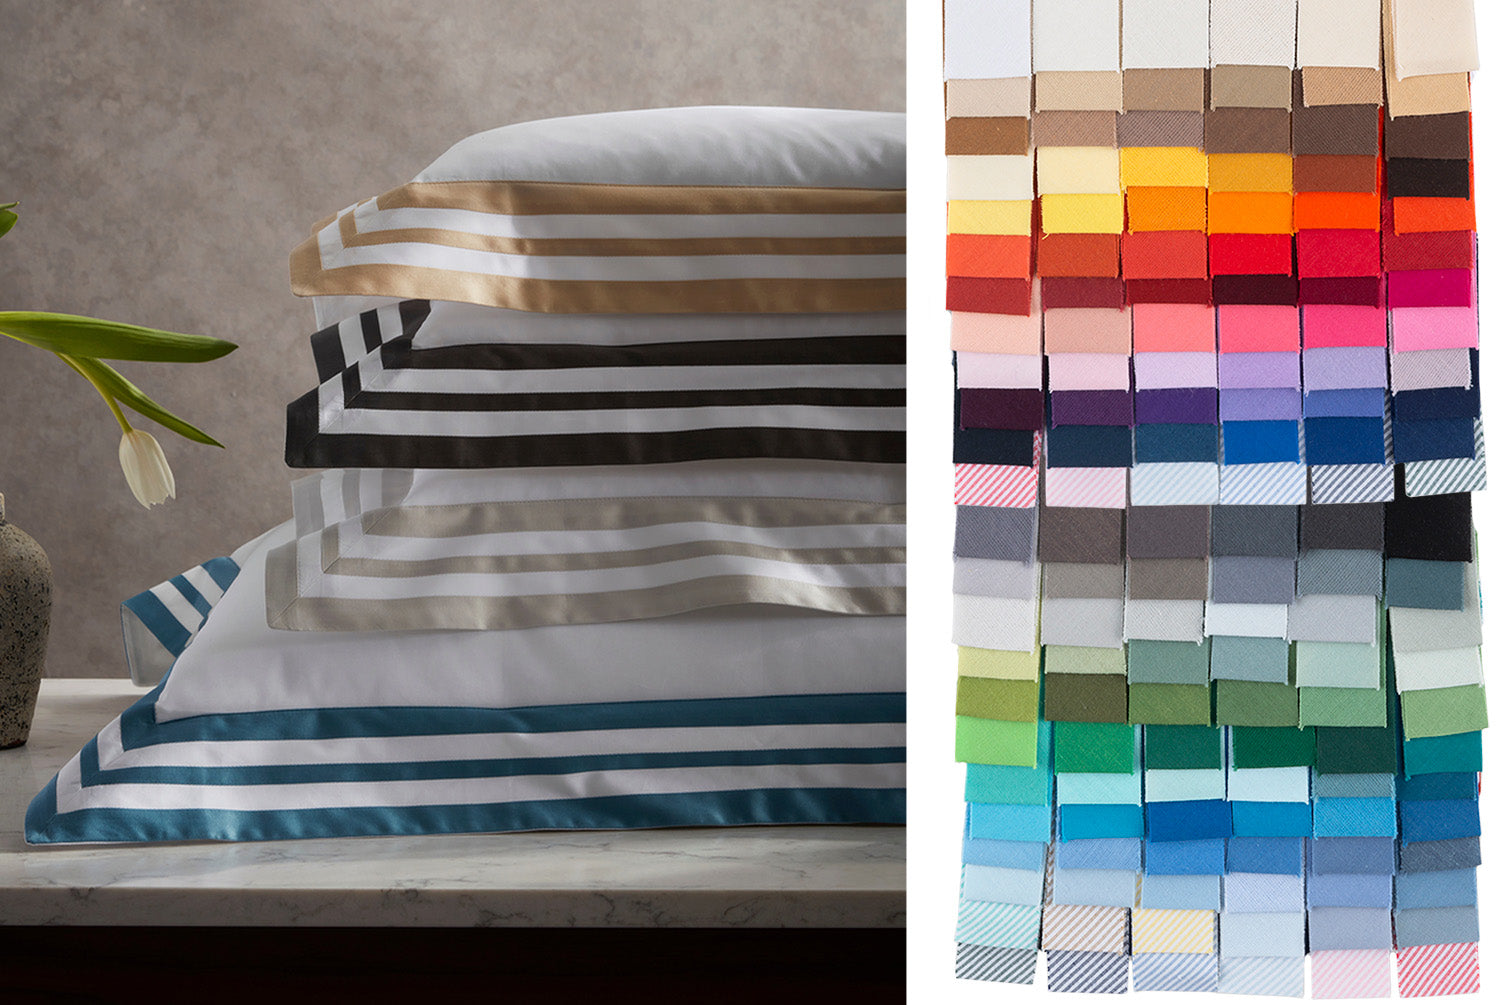 Matouk Applique on Allegro Bedding (left) and available Tape Color Samples (right)